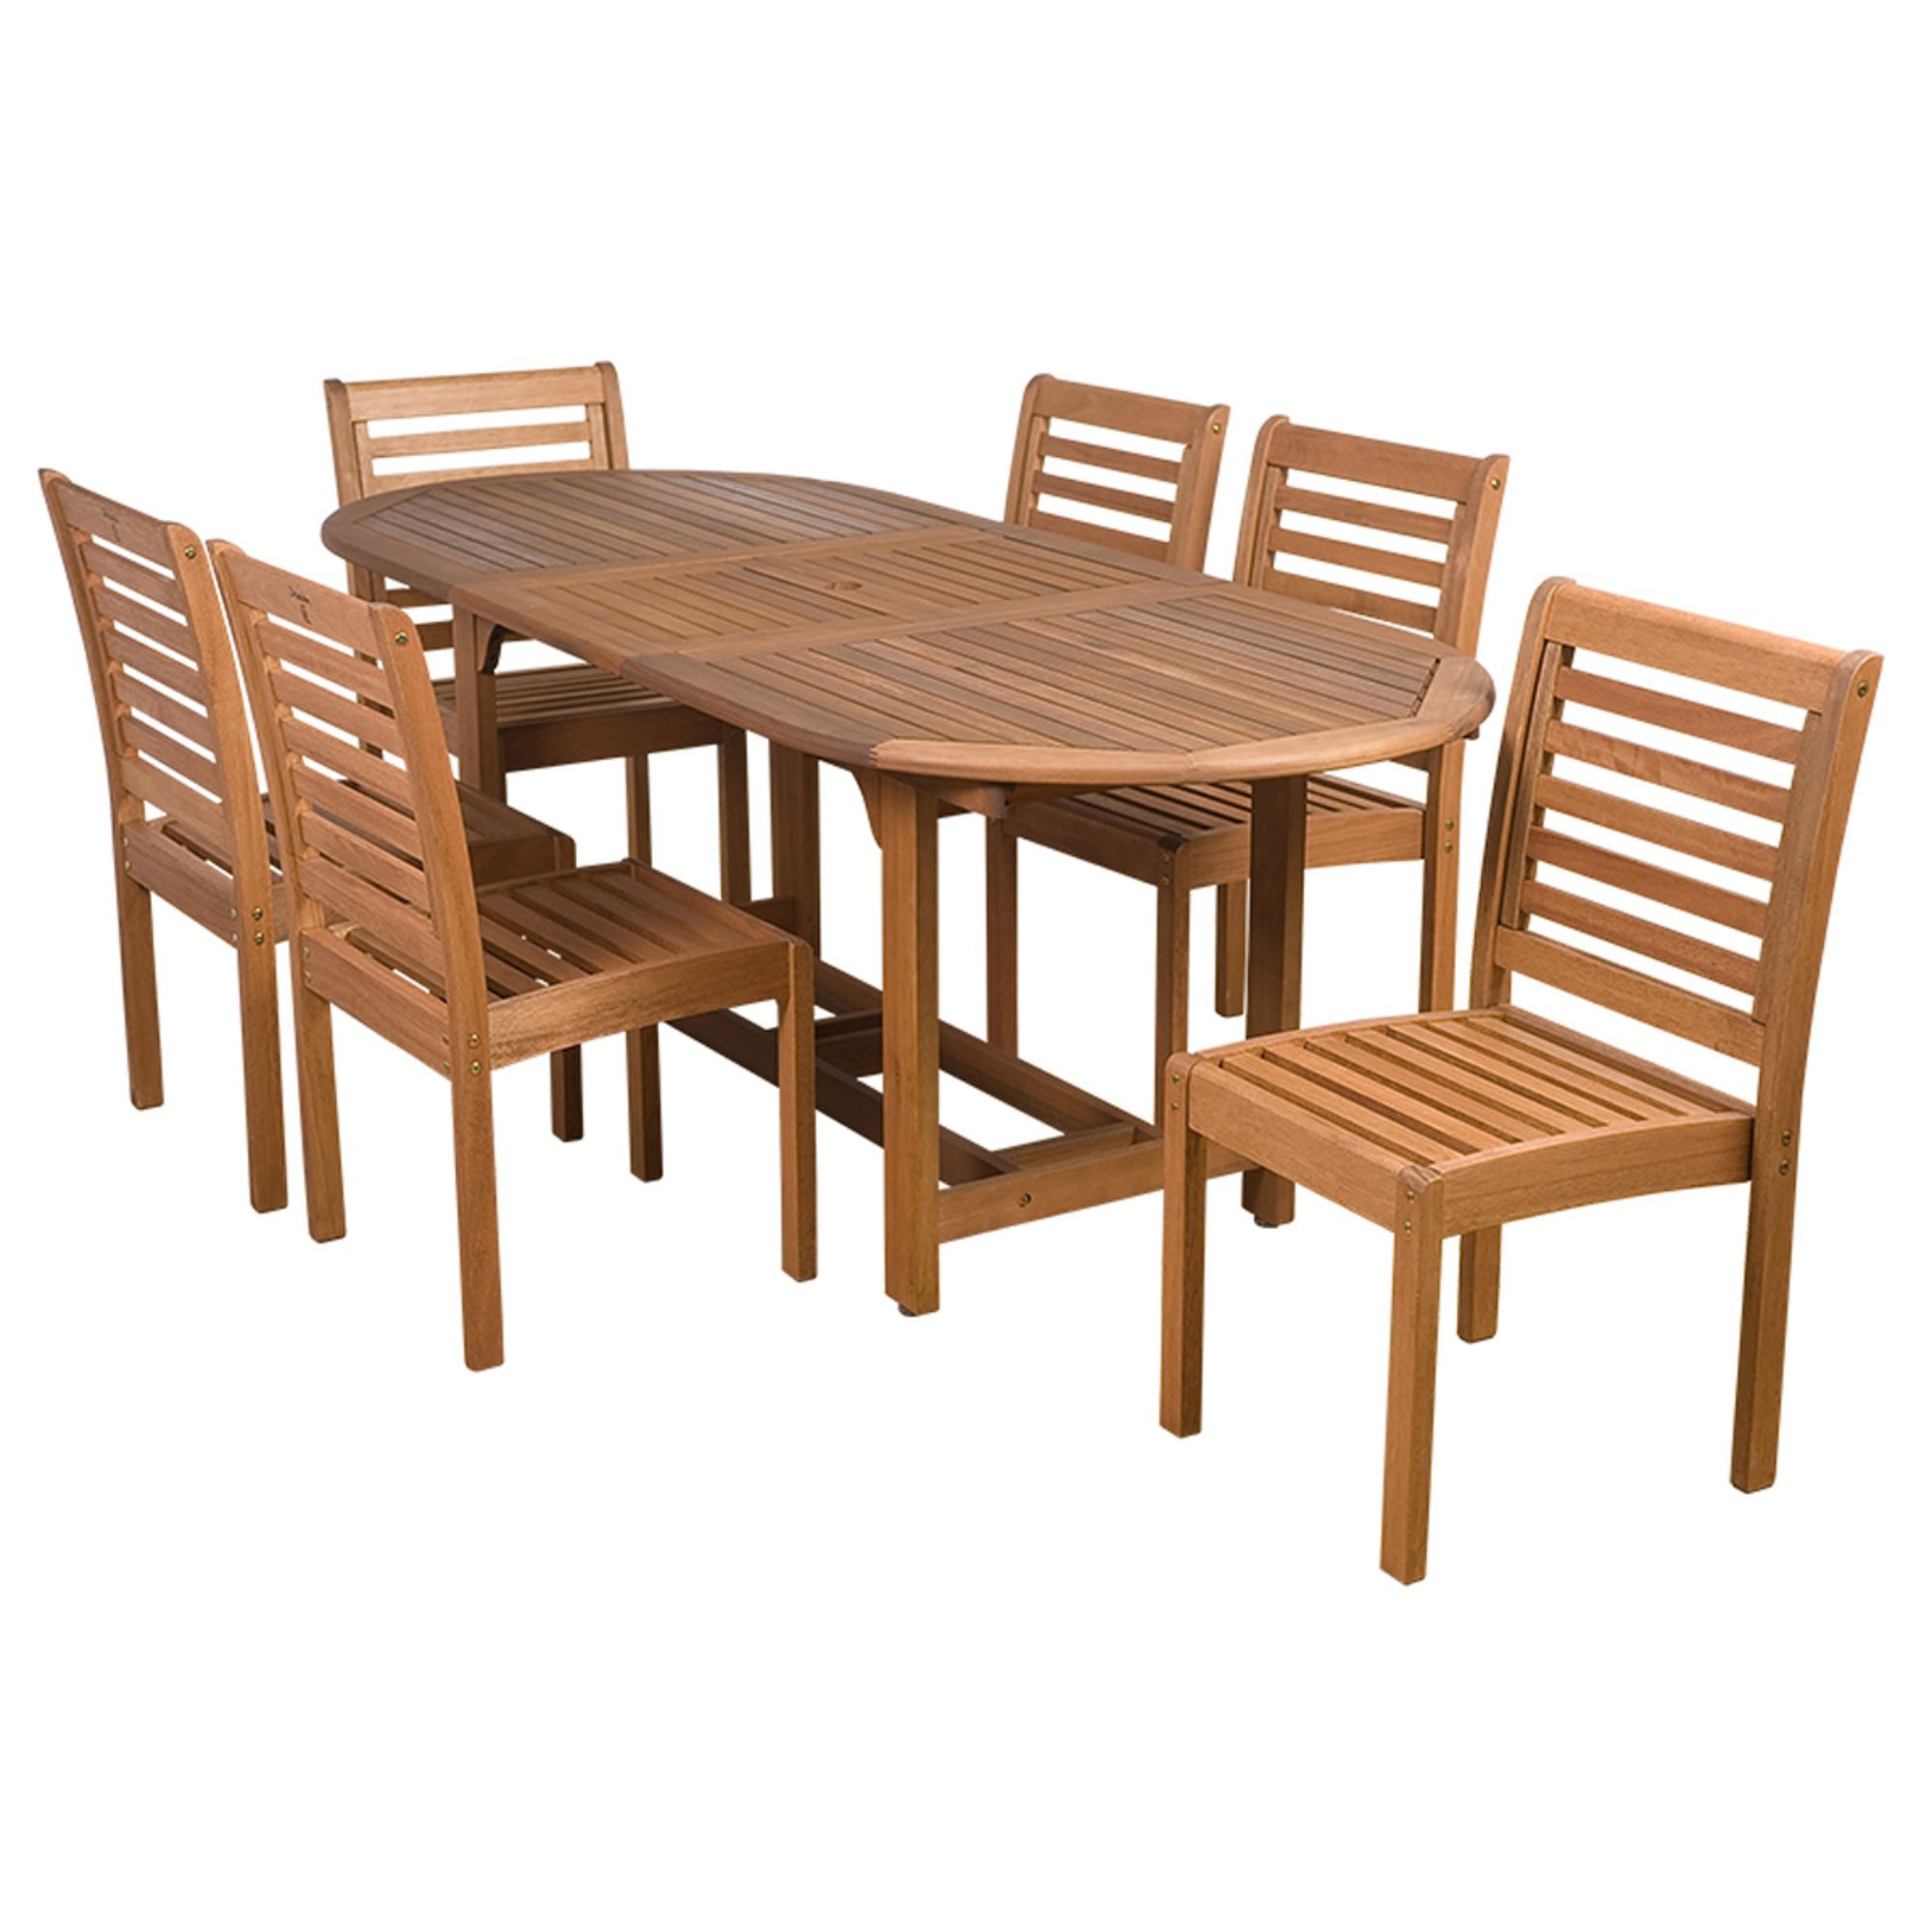 7 Piece Brown Eucalyptus Armless Oval Extendable Patio Dining Set 35 For Oval 7 Piece Outdoor Patio Dining Sets (View 10 of 15)